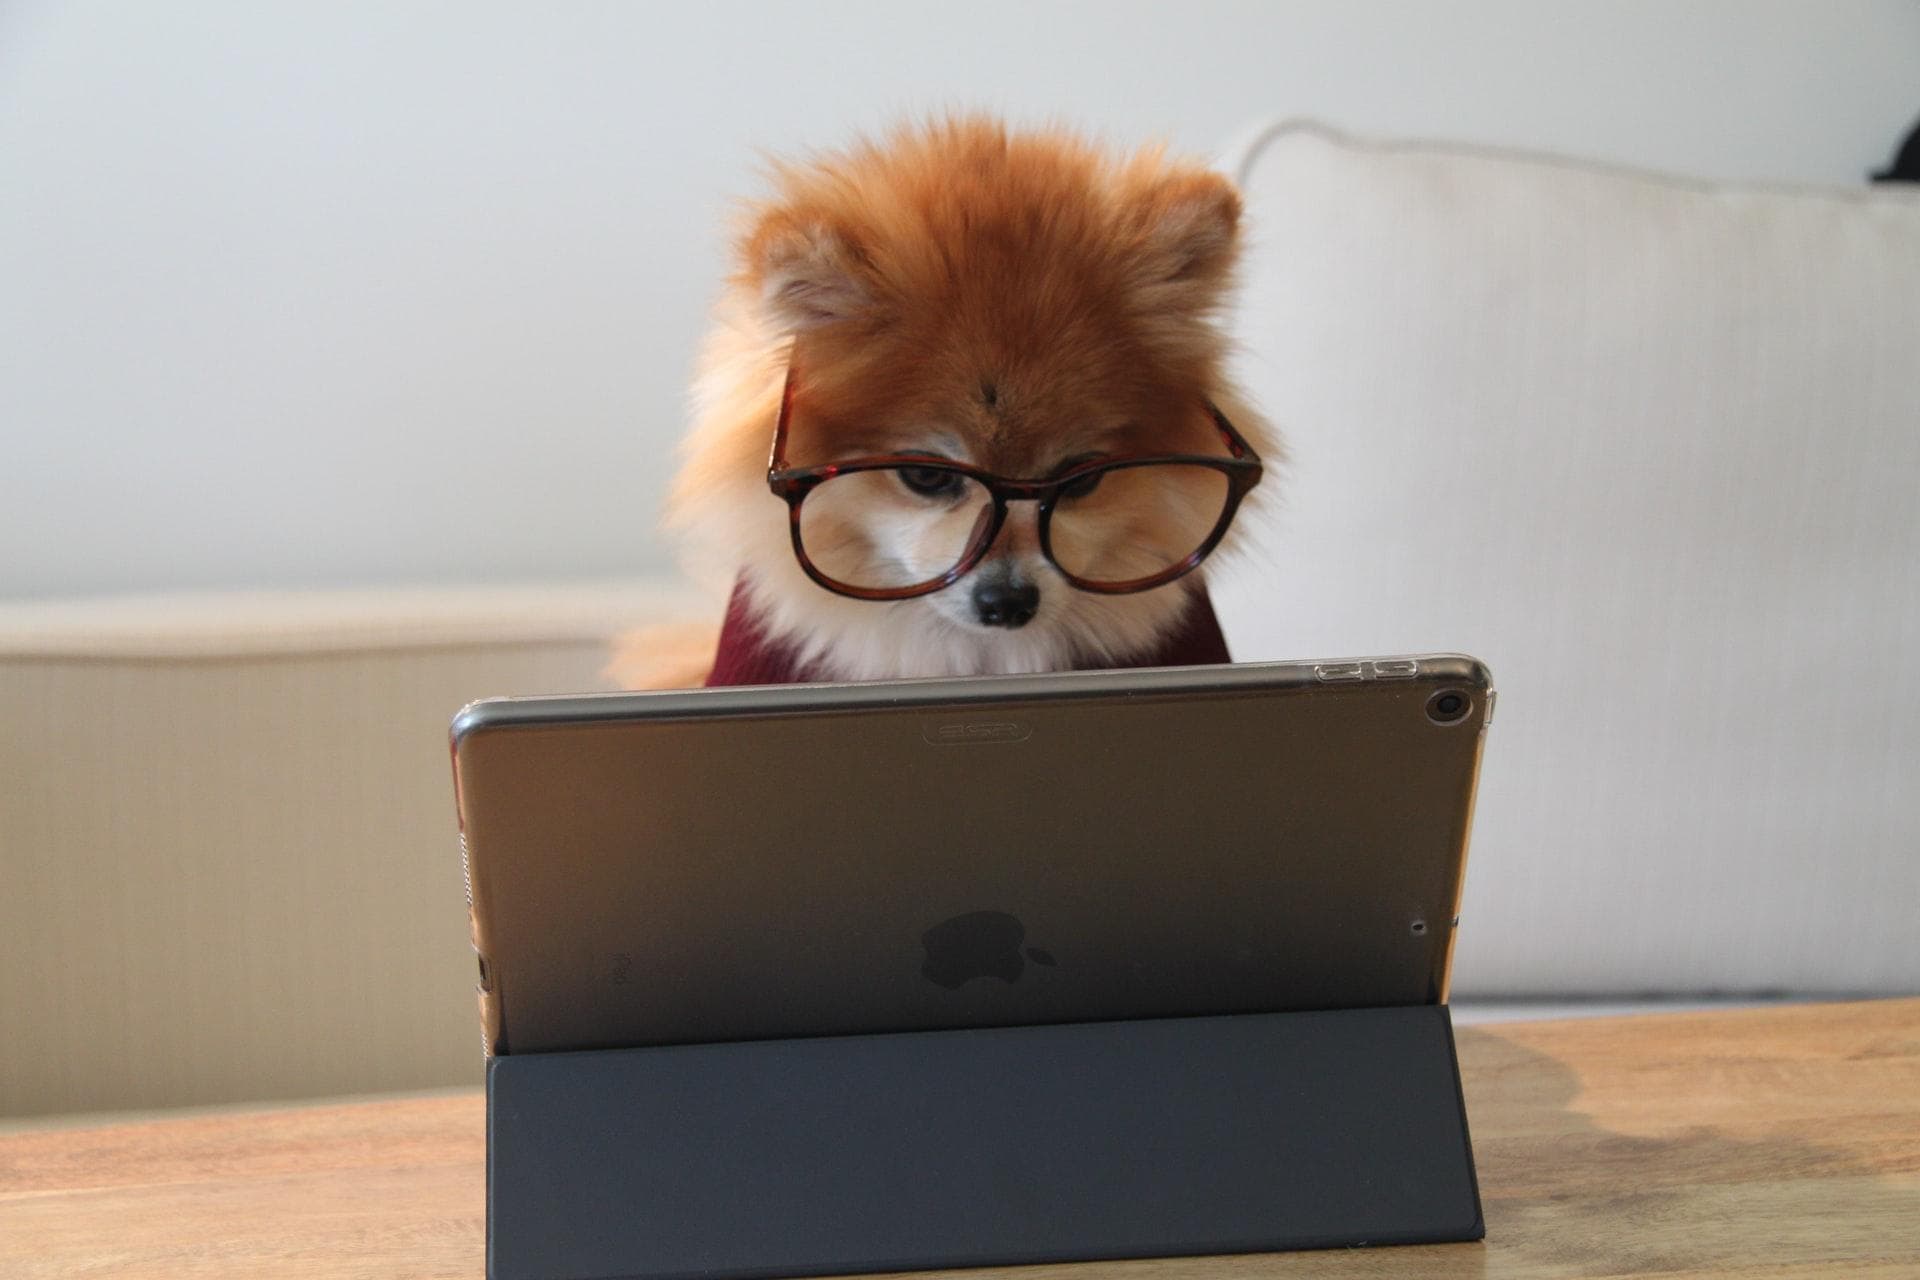 Pomeranian working on an iPad, wearing glasses. Extremely fluffy and cute.